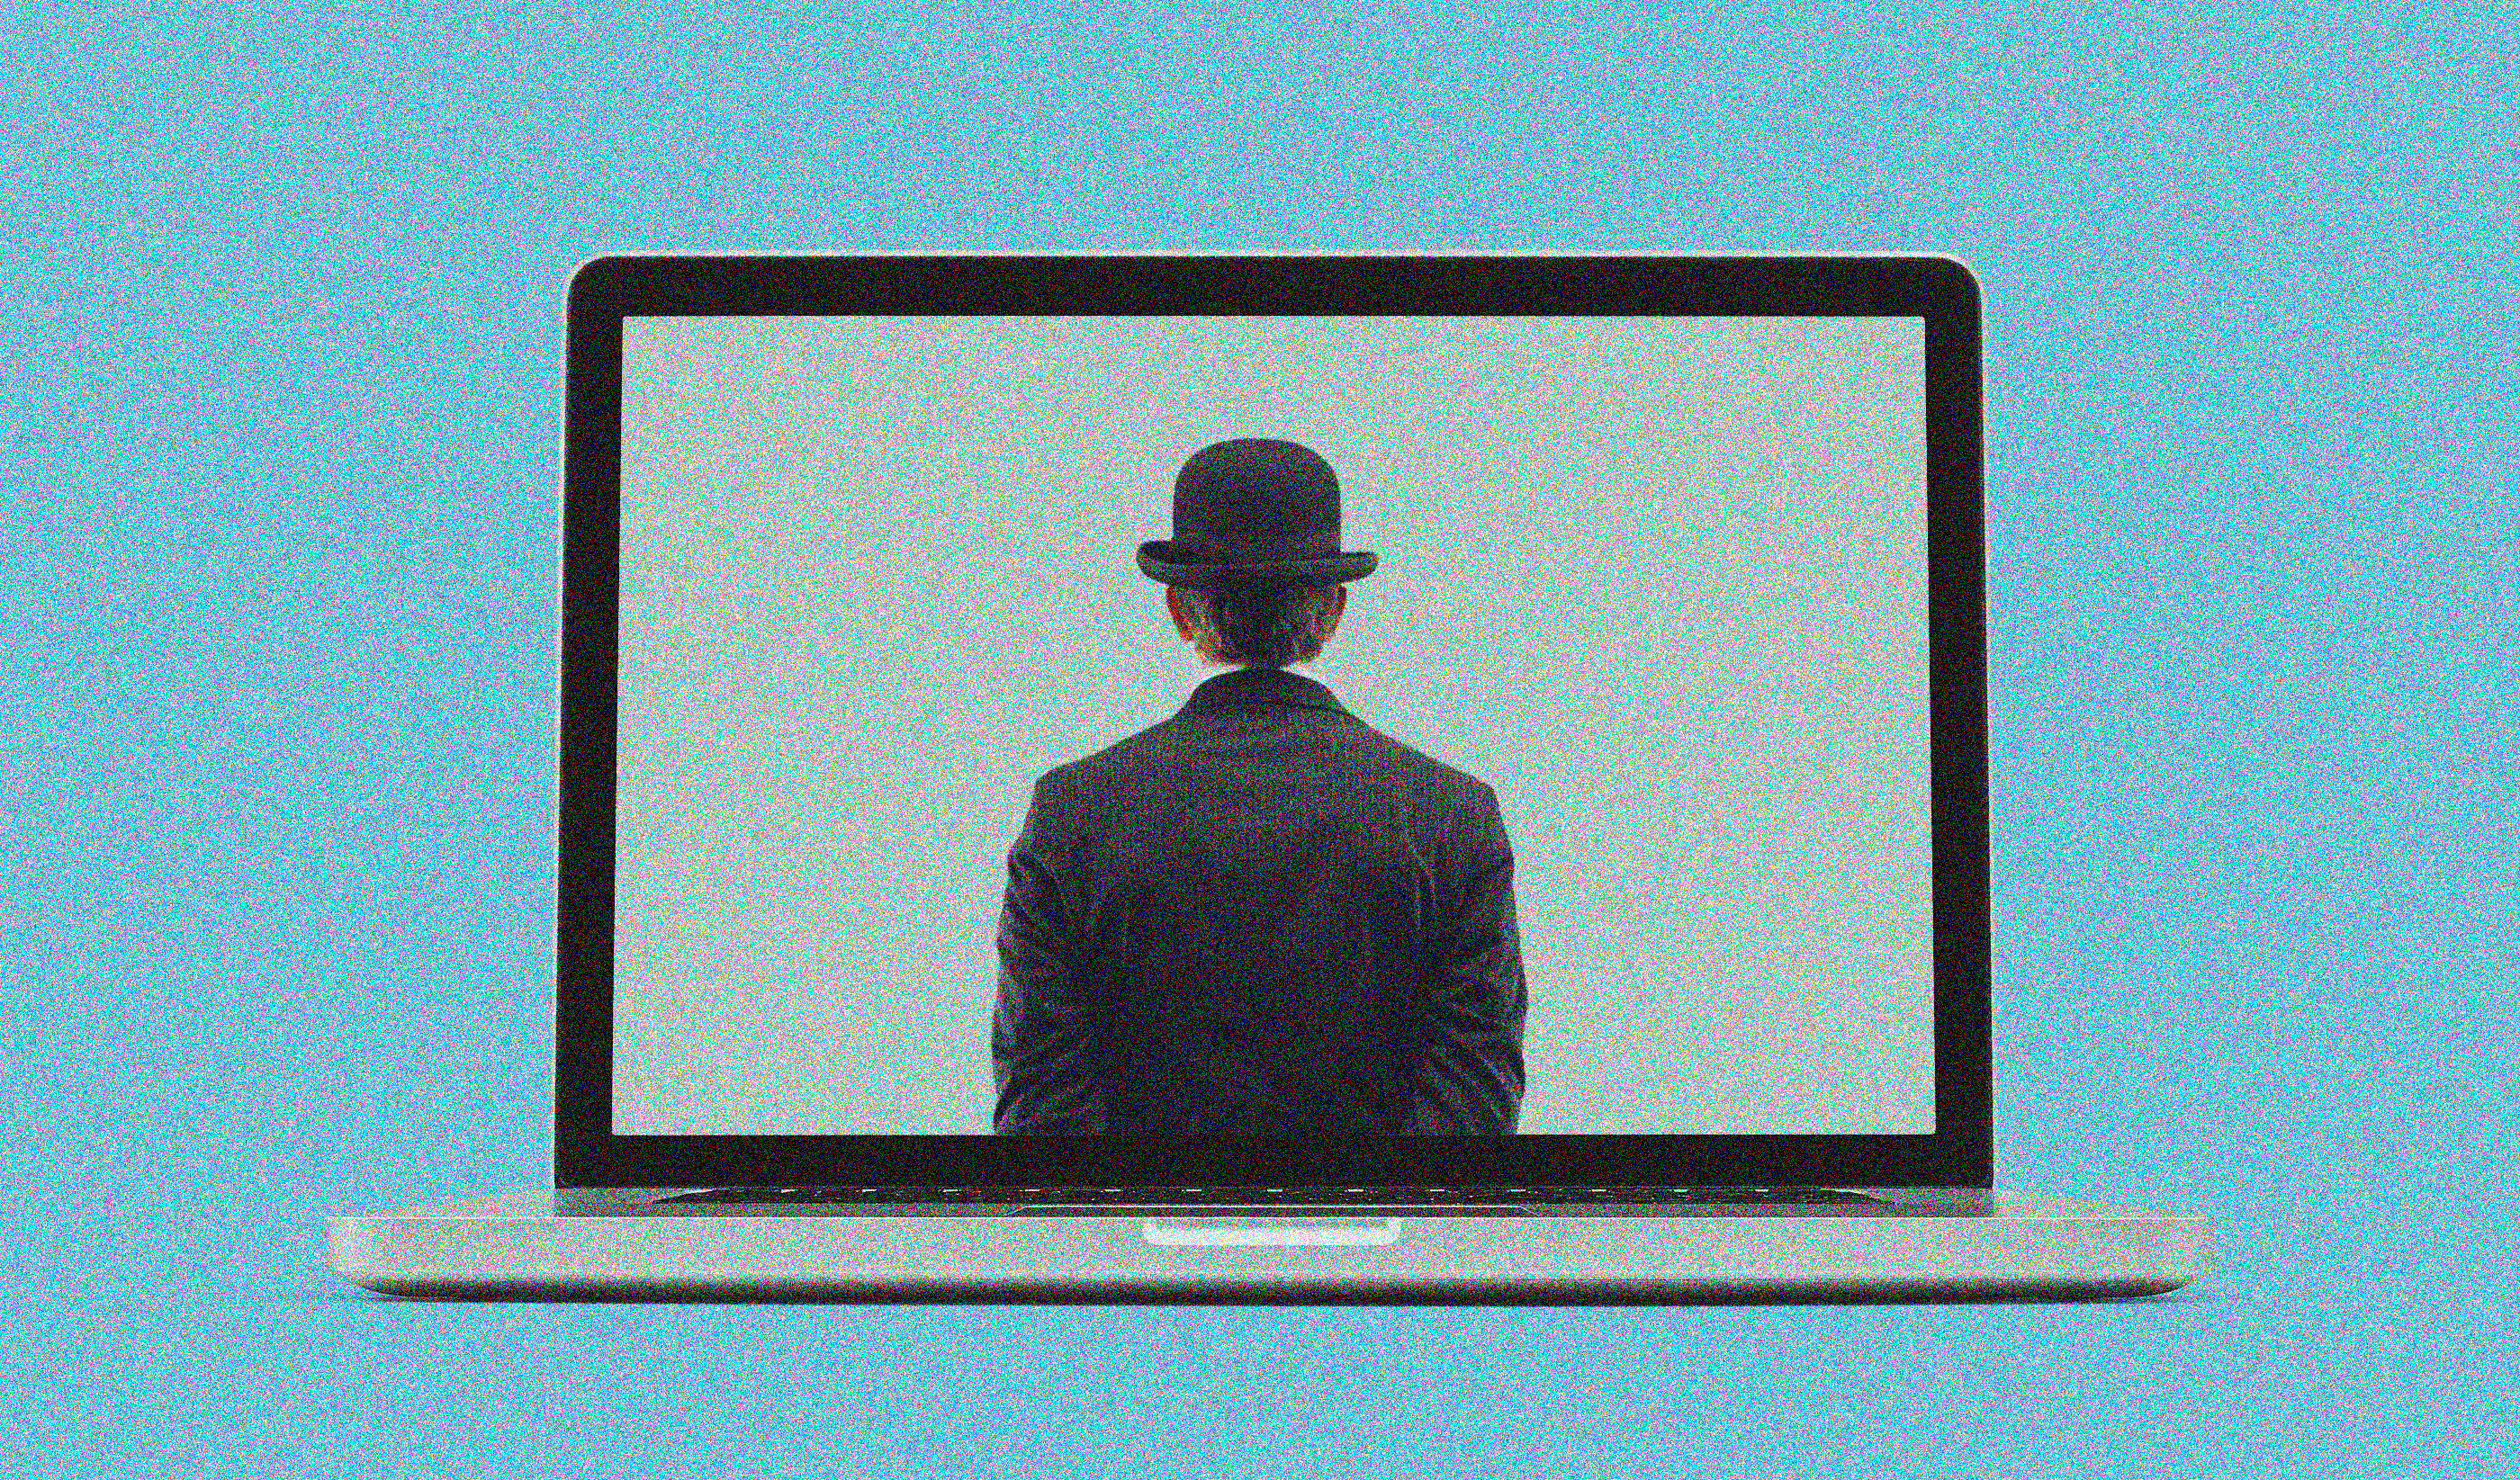 No, Your Incognito Browser Isn’t Actually Private. Here's How to Safely Surf the Internet